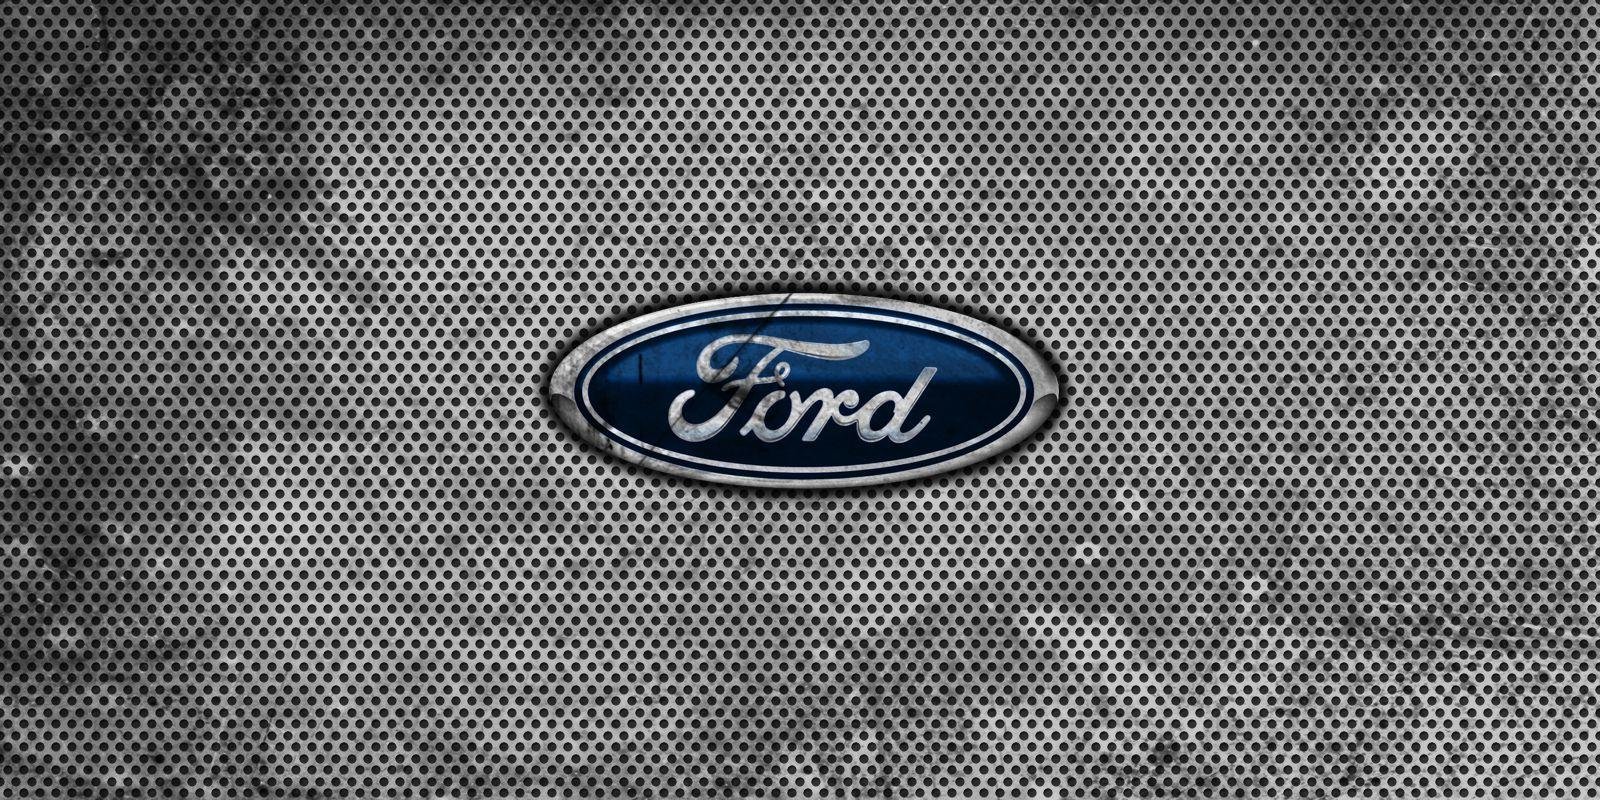 Ford Brand Logo - Ford Logo, Ford Car Symbol Meaning and History | Car Brand Names.com